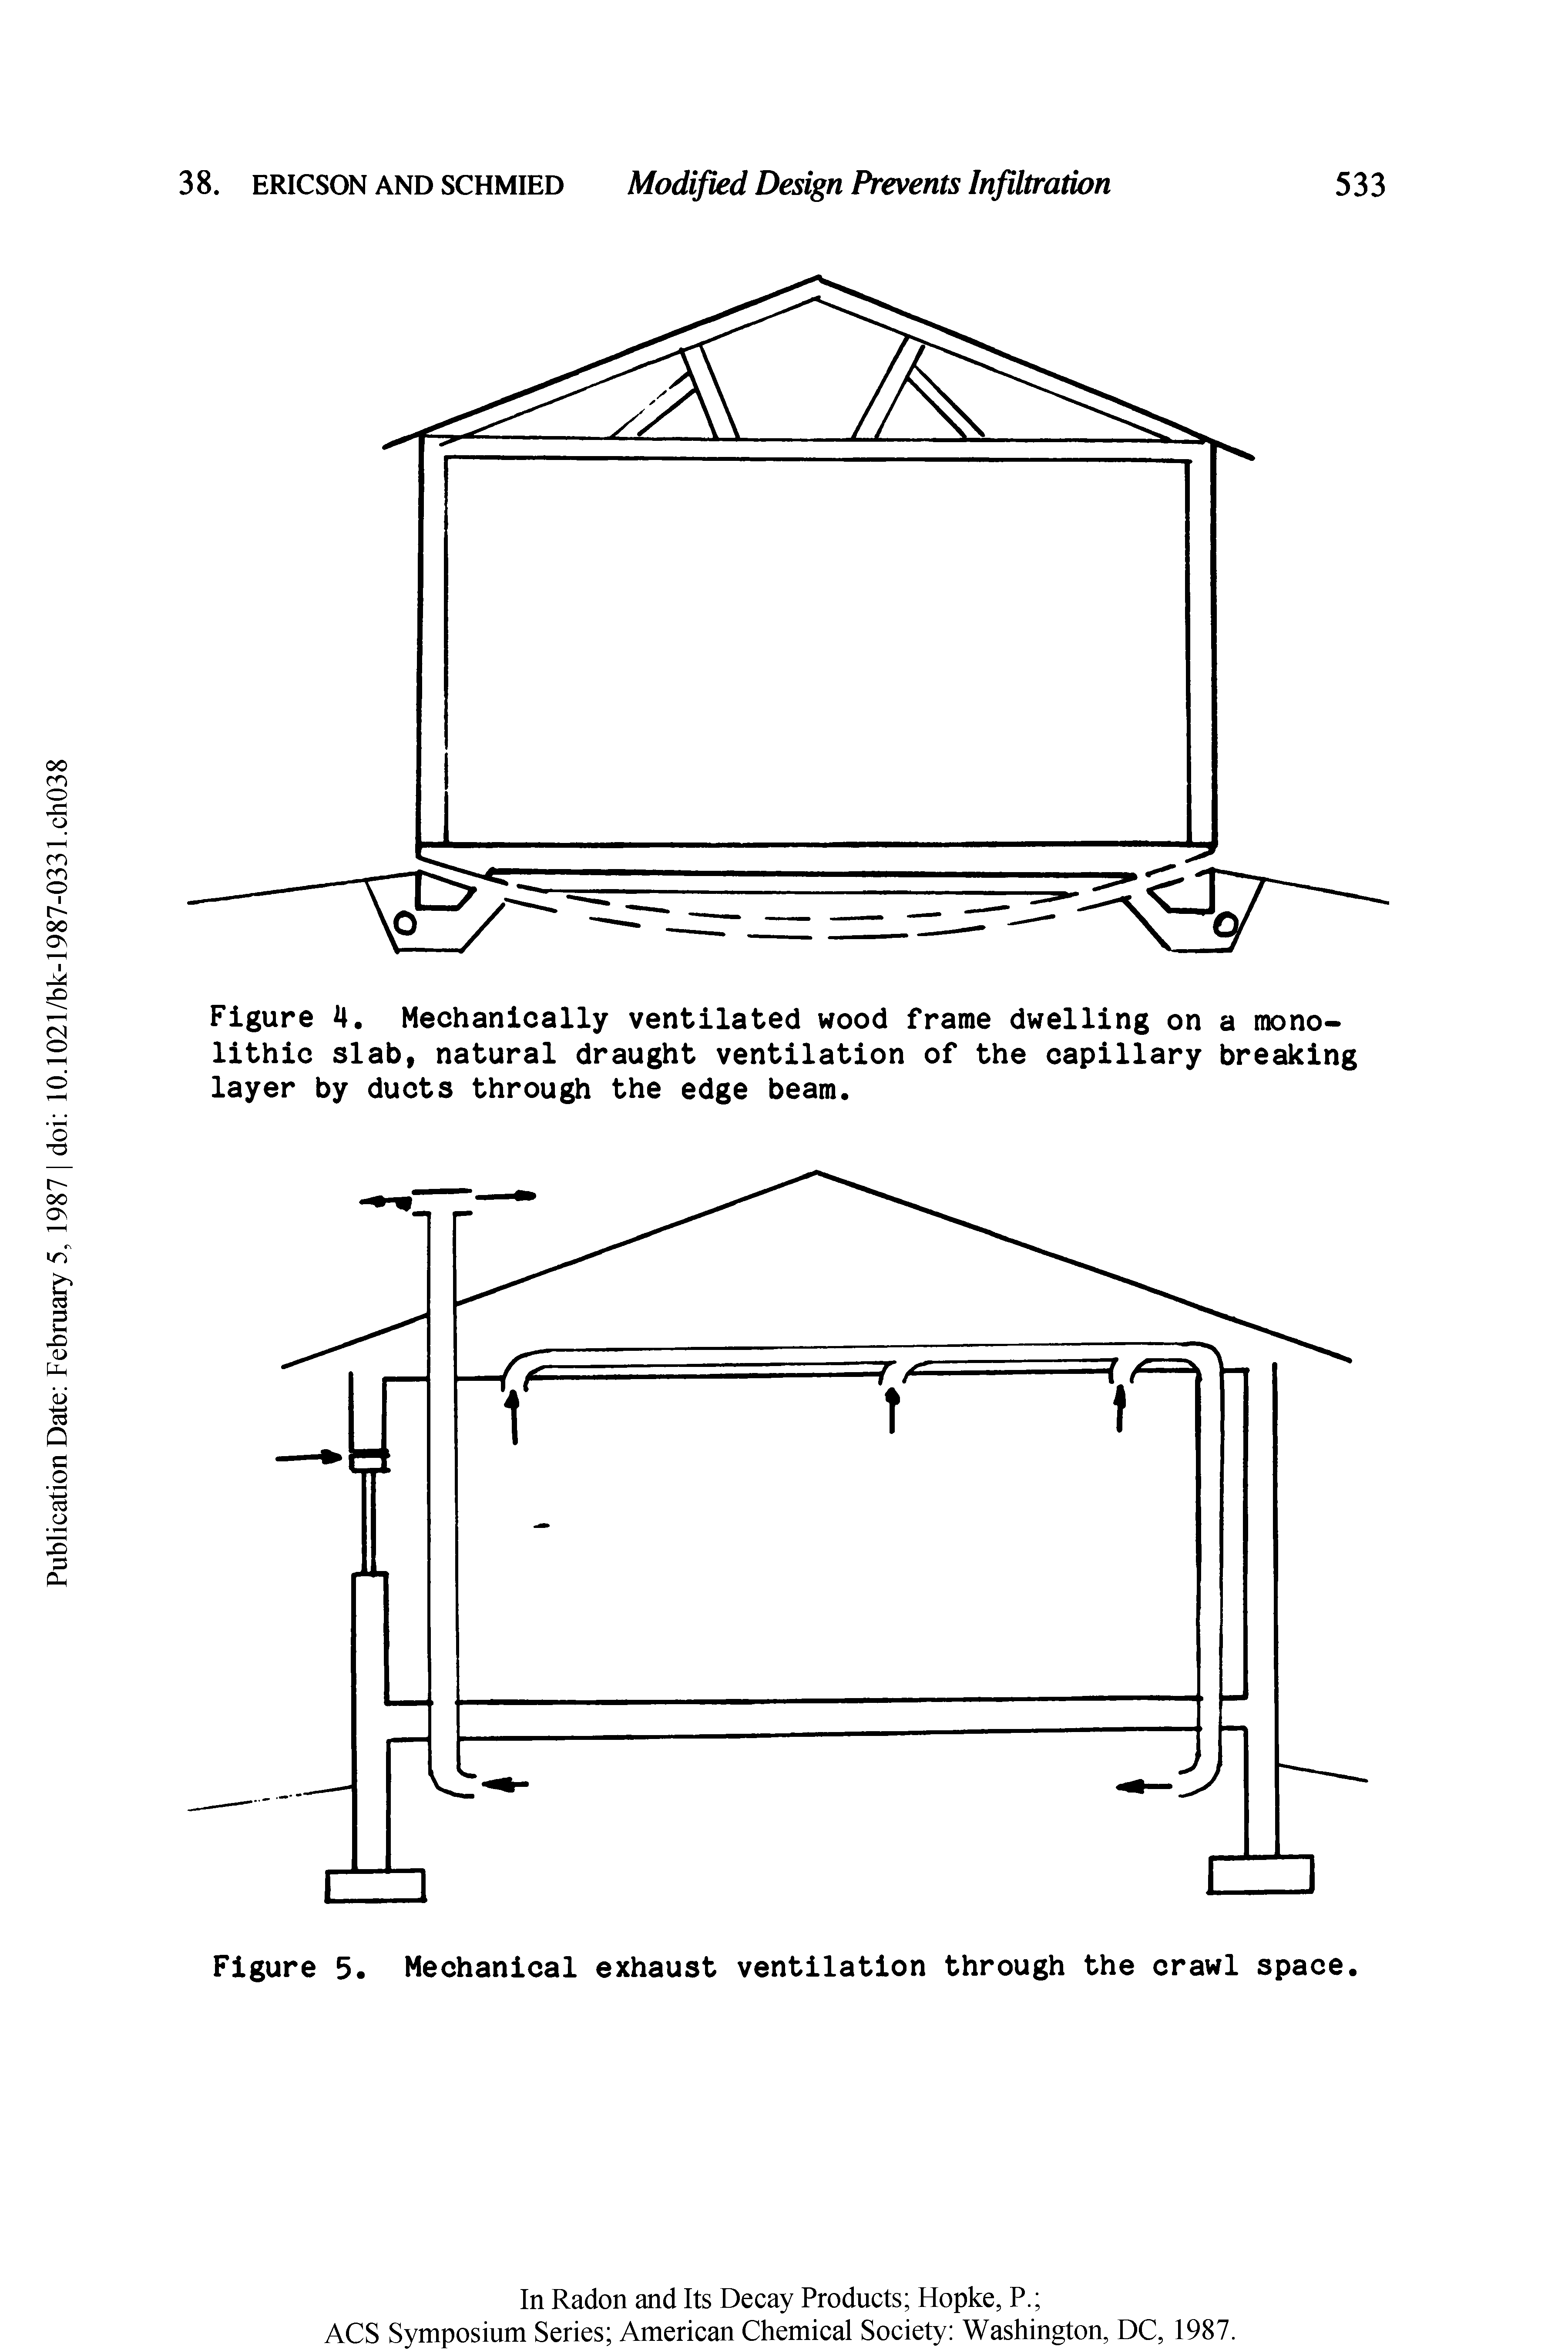 Figure 4. Mechanically ventilated wood frame dwelling on a monolithic slab, natural draught ventilation of the capillary breaking layer by ducts through the edge beam.